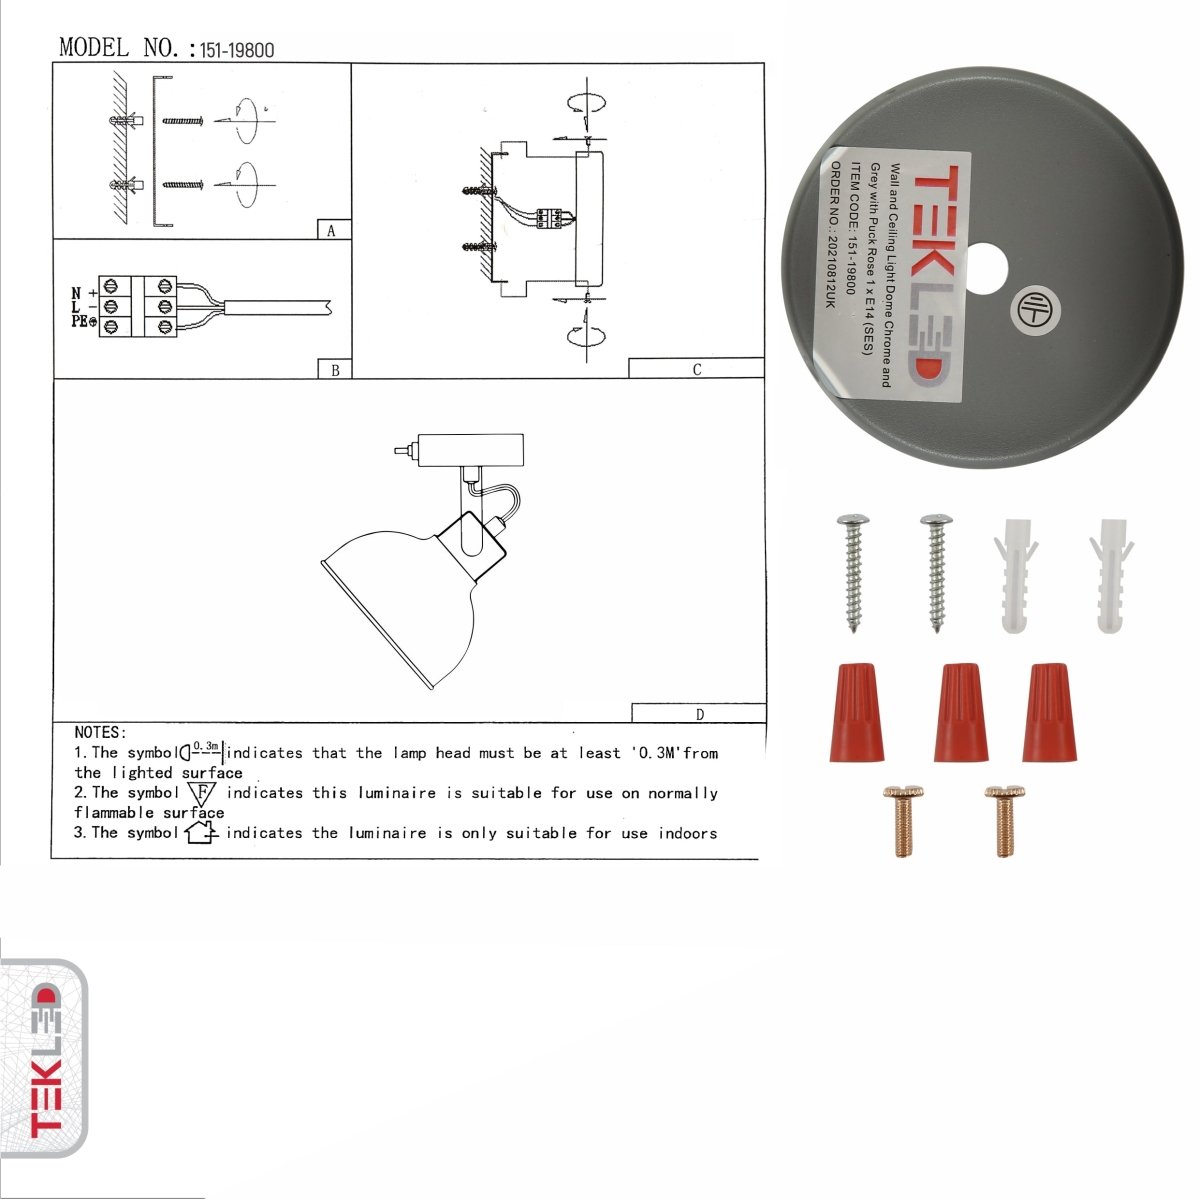 User manual for Grey Dome Adjustable Wall and Ceiling Light with Switch on the Rose E14 | TEKLED 151-19800